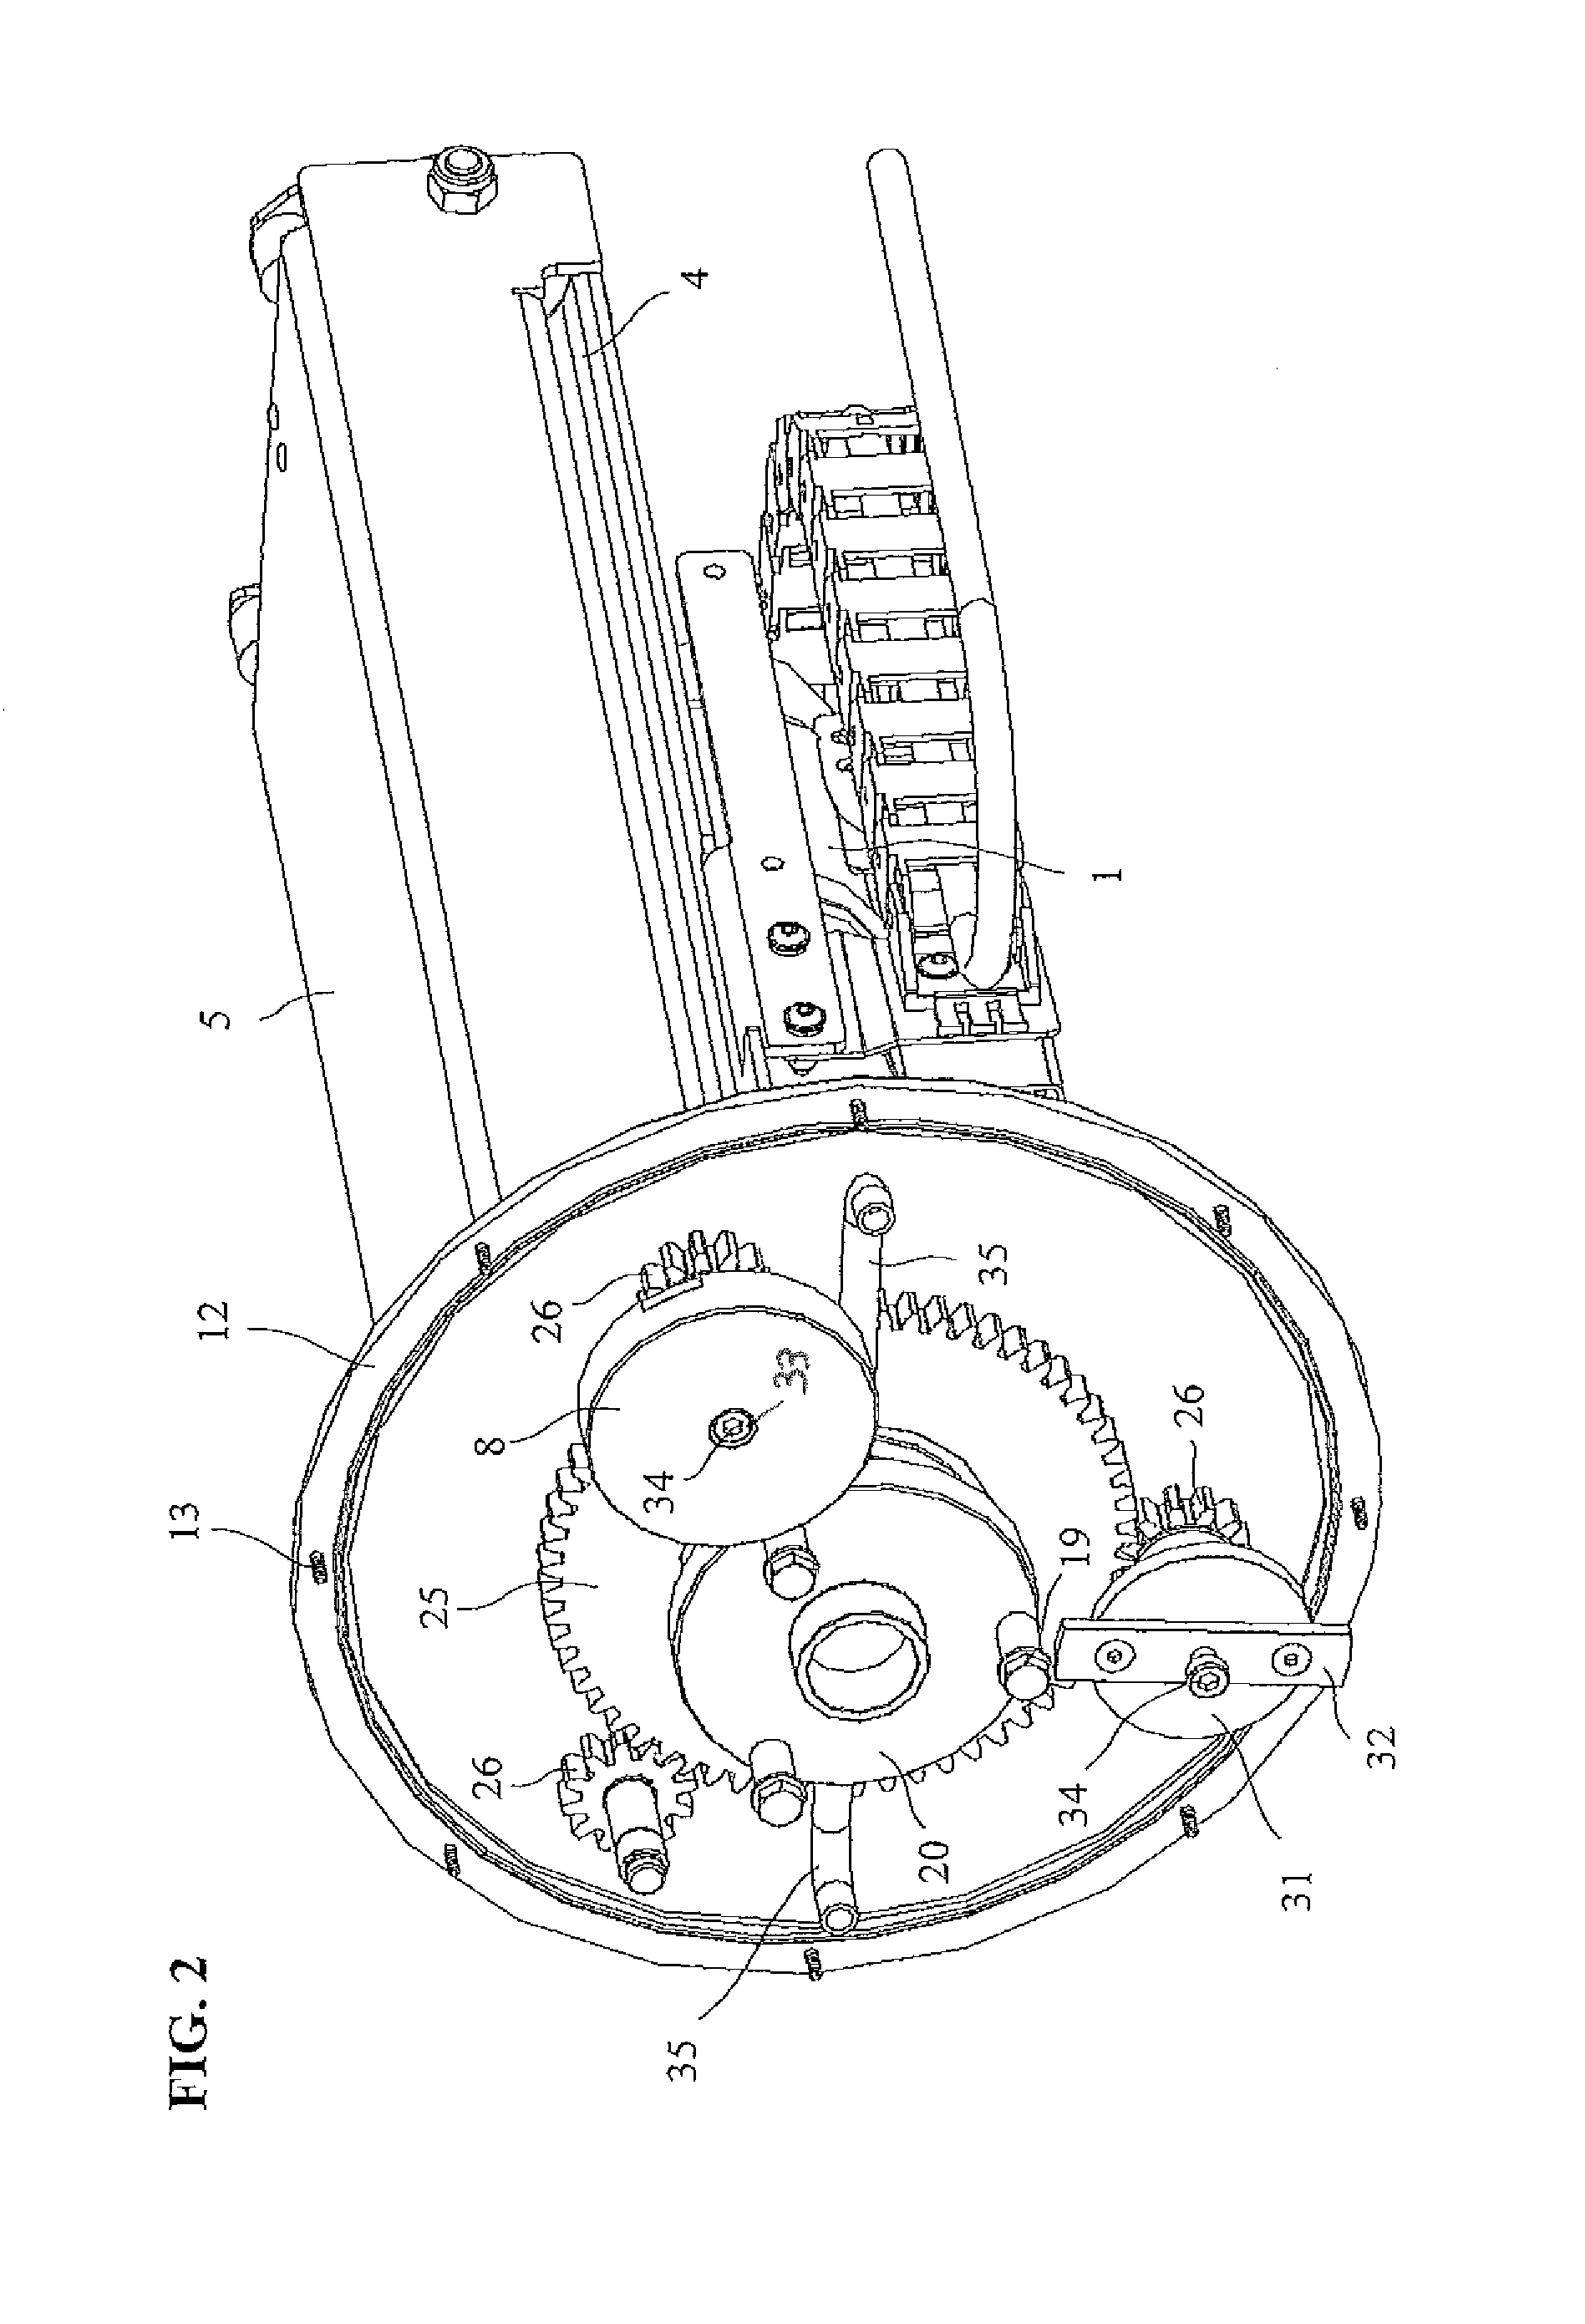 Device for cleaning vehicle wheels